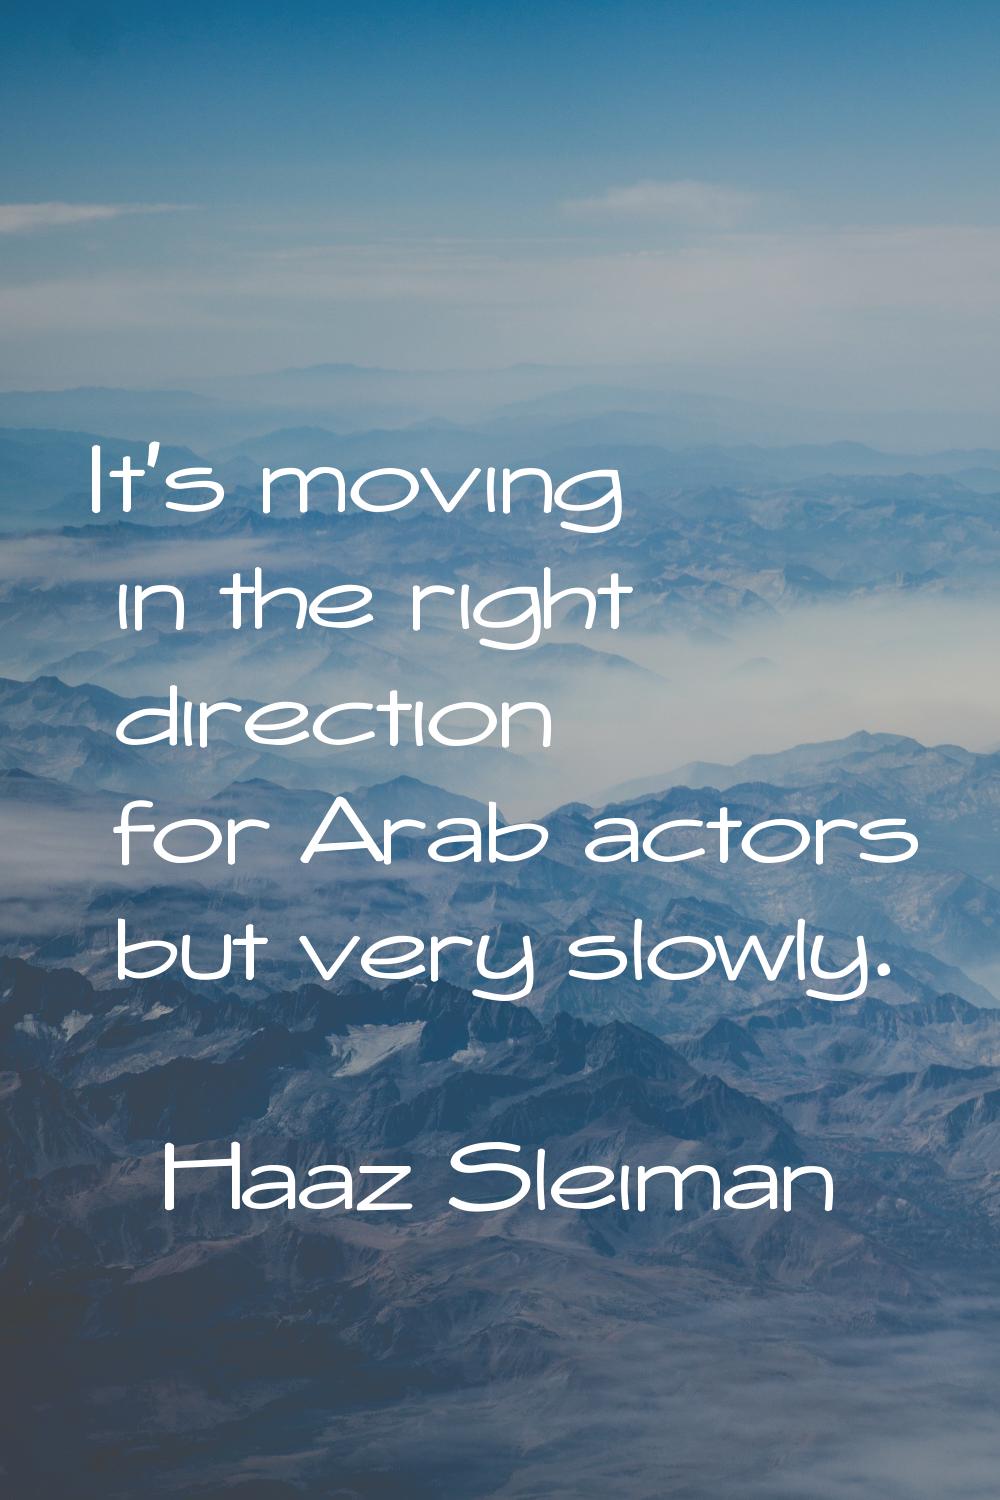 It's moving in the right direction for Arab actors but very slowly.